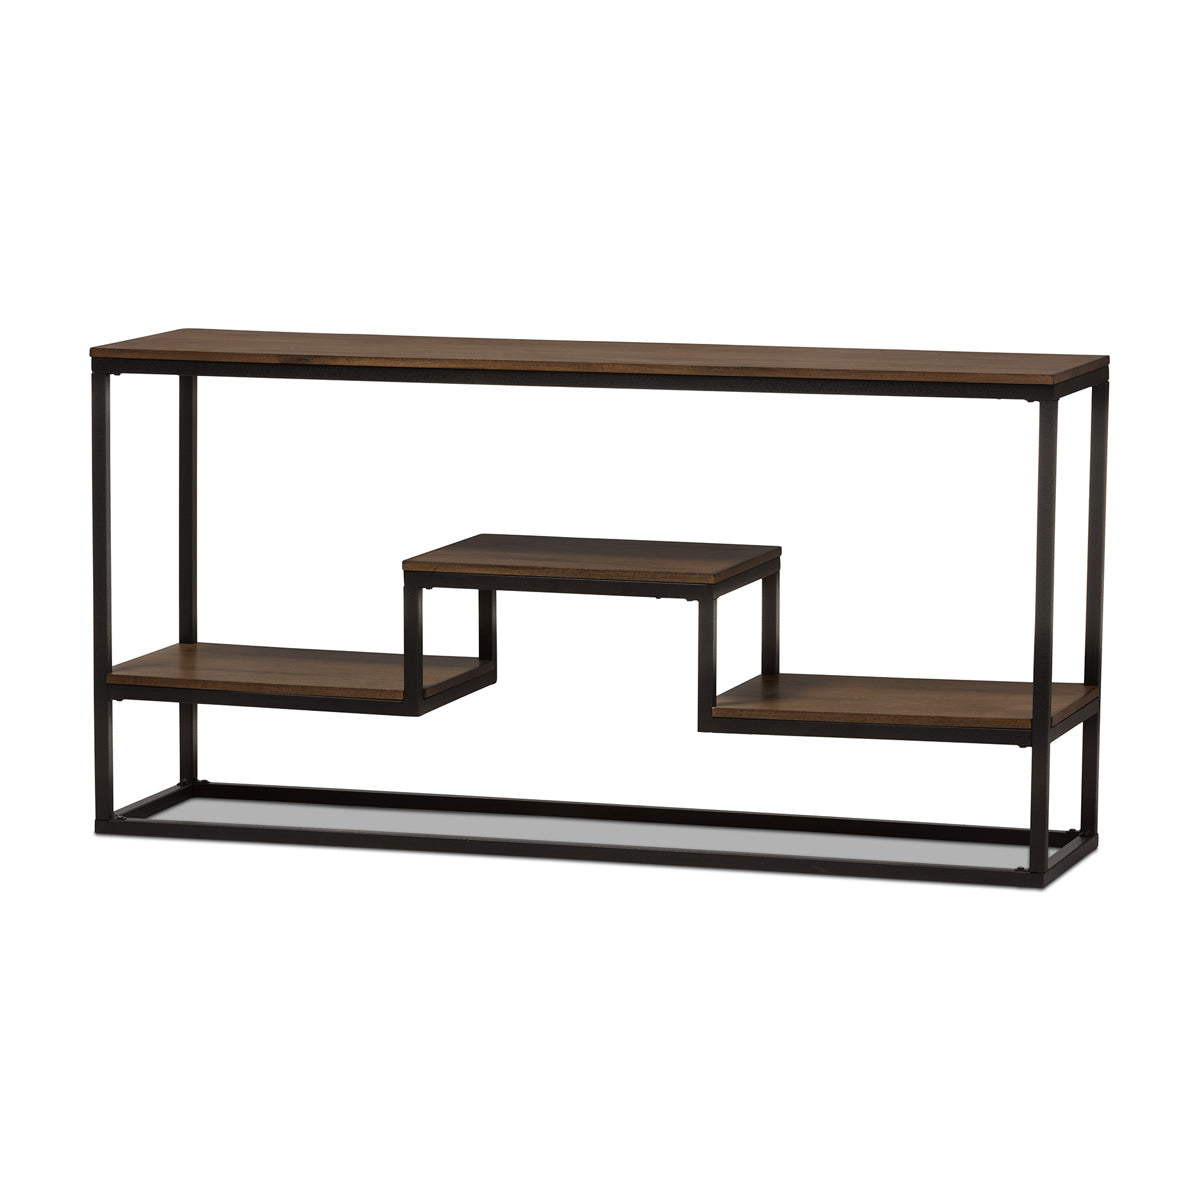 Baxton Studio Doreen Rustic Industrial Style Antique Black Textured Finished Metal Distressed Wood Console Table Baxton Studio-side tables-Minimal And Modern - 2